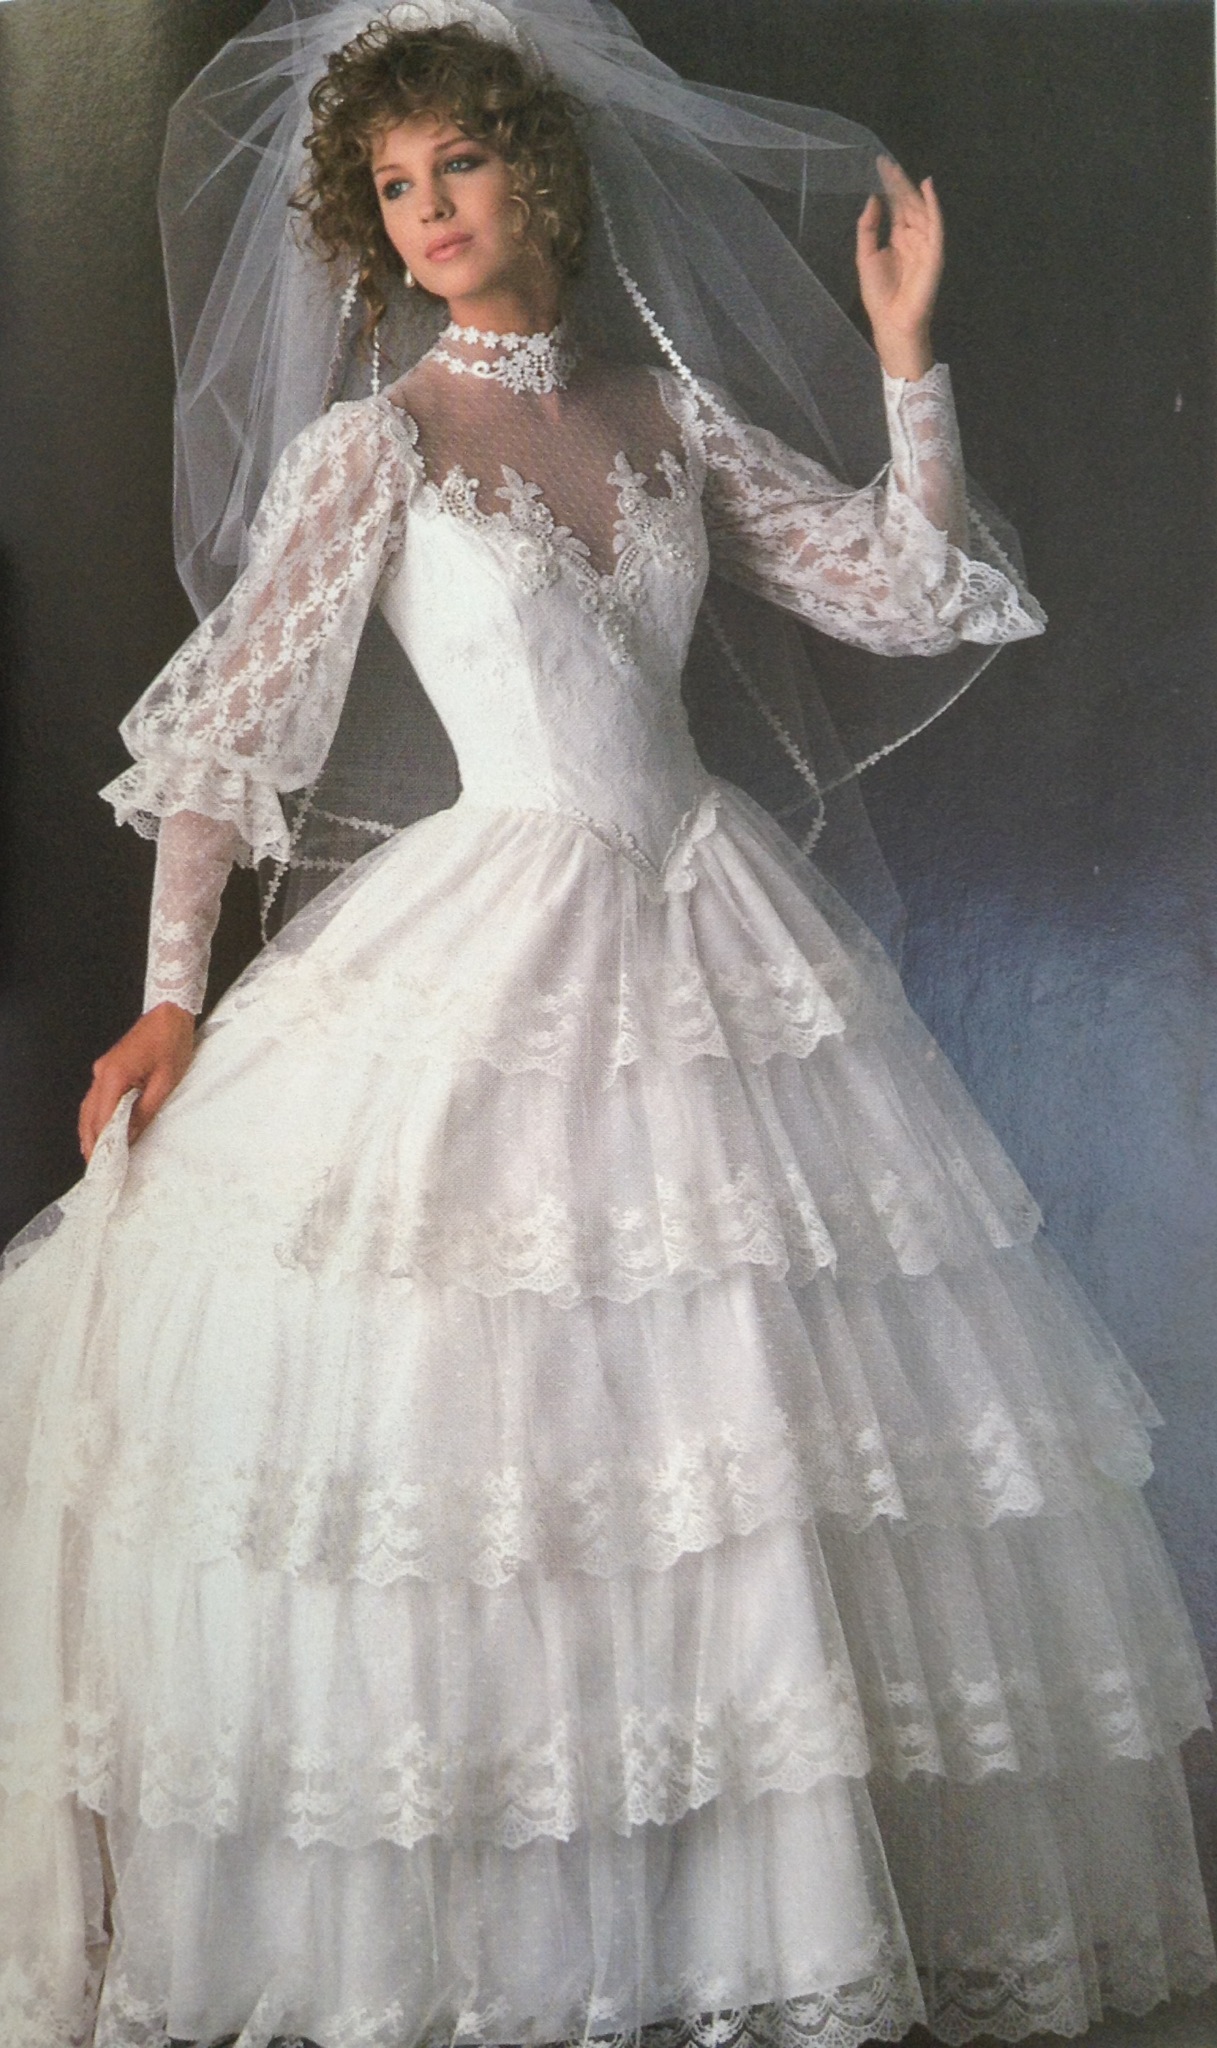 80s Fashion Exclusive! The 11 Worst Wedding Gowns & Bridesmaid Dresses ...